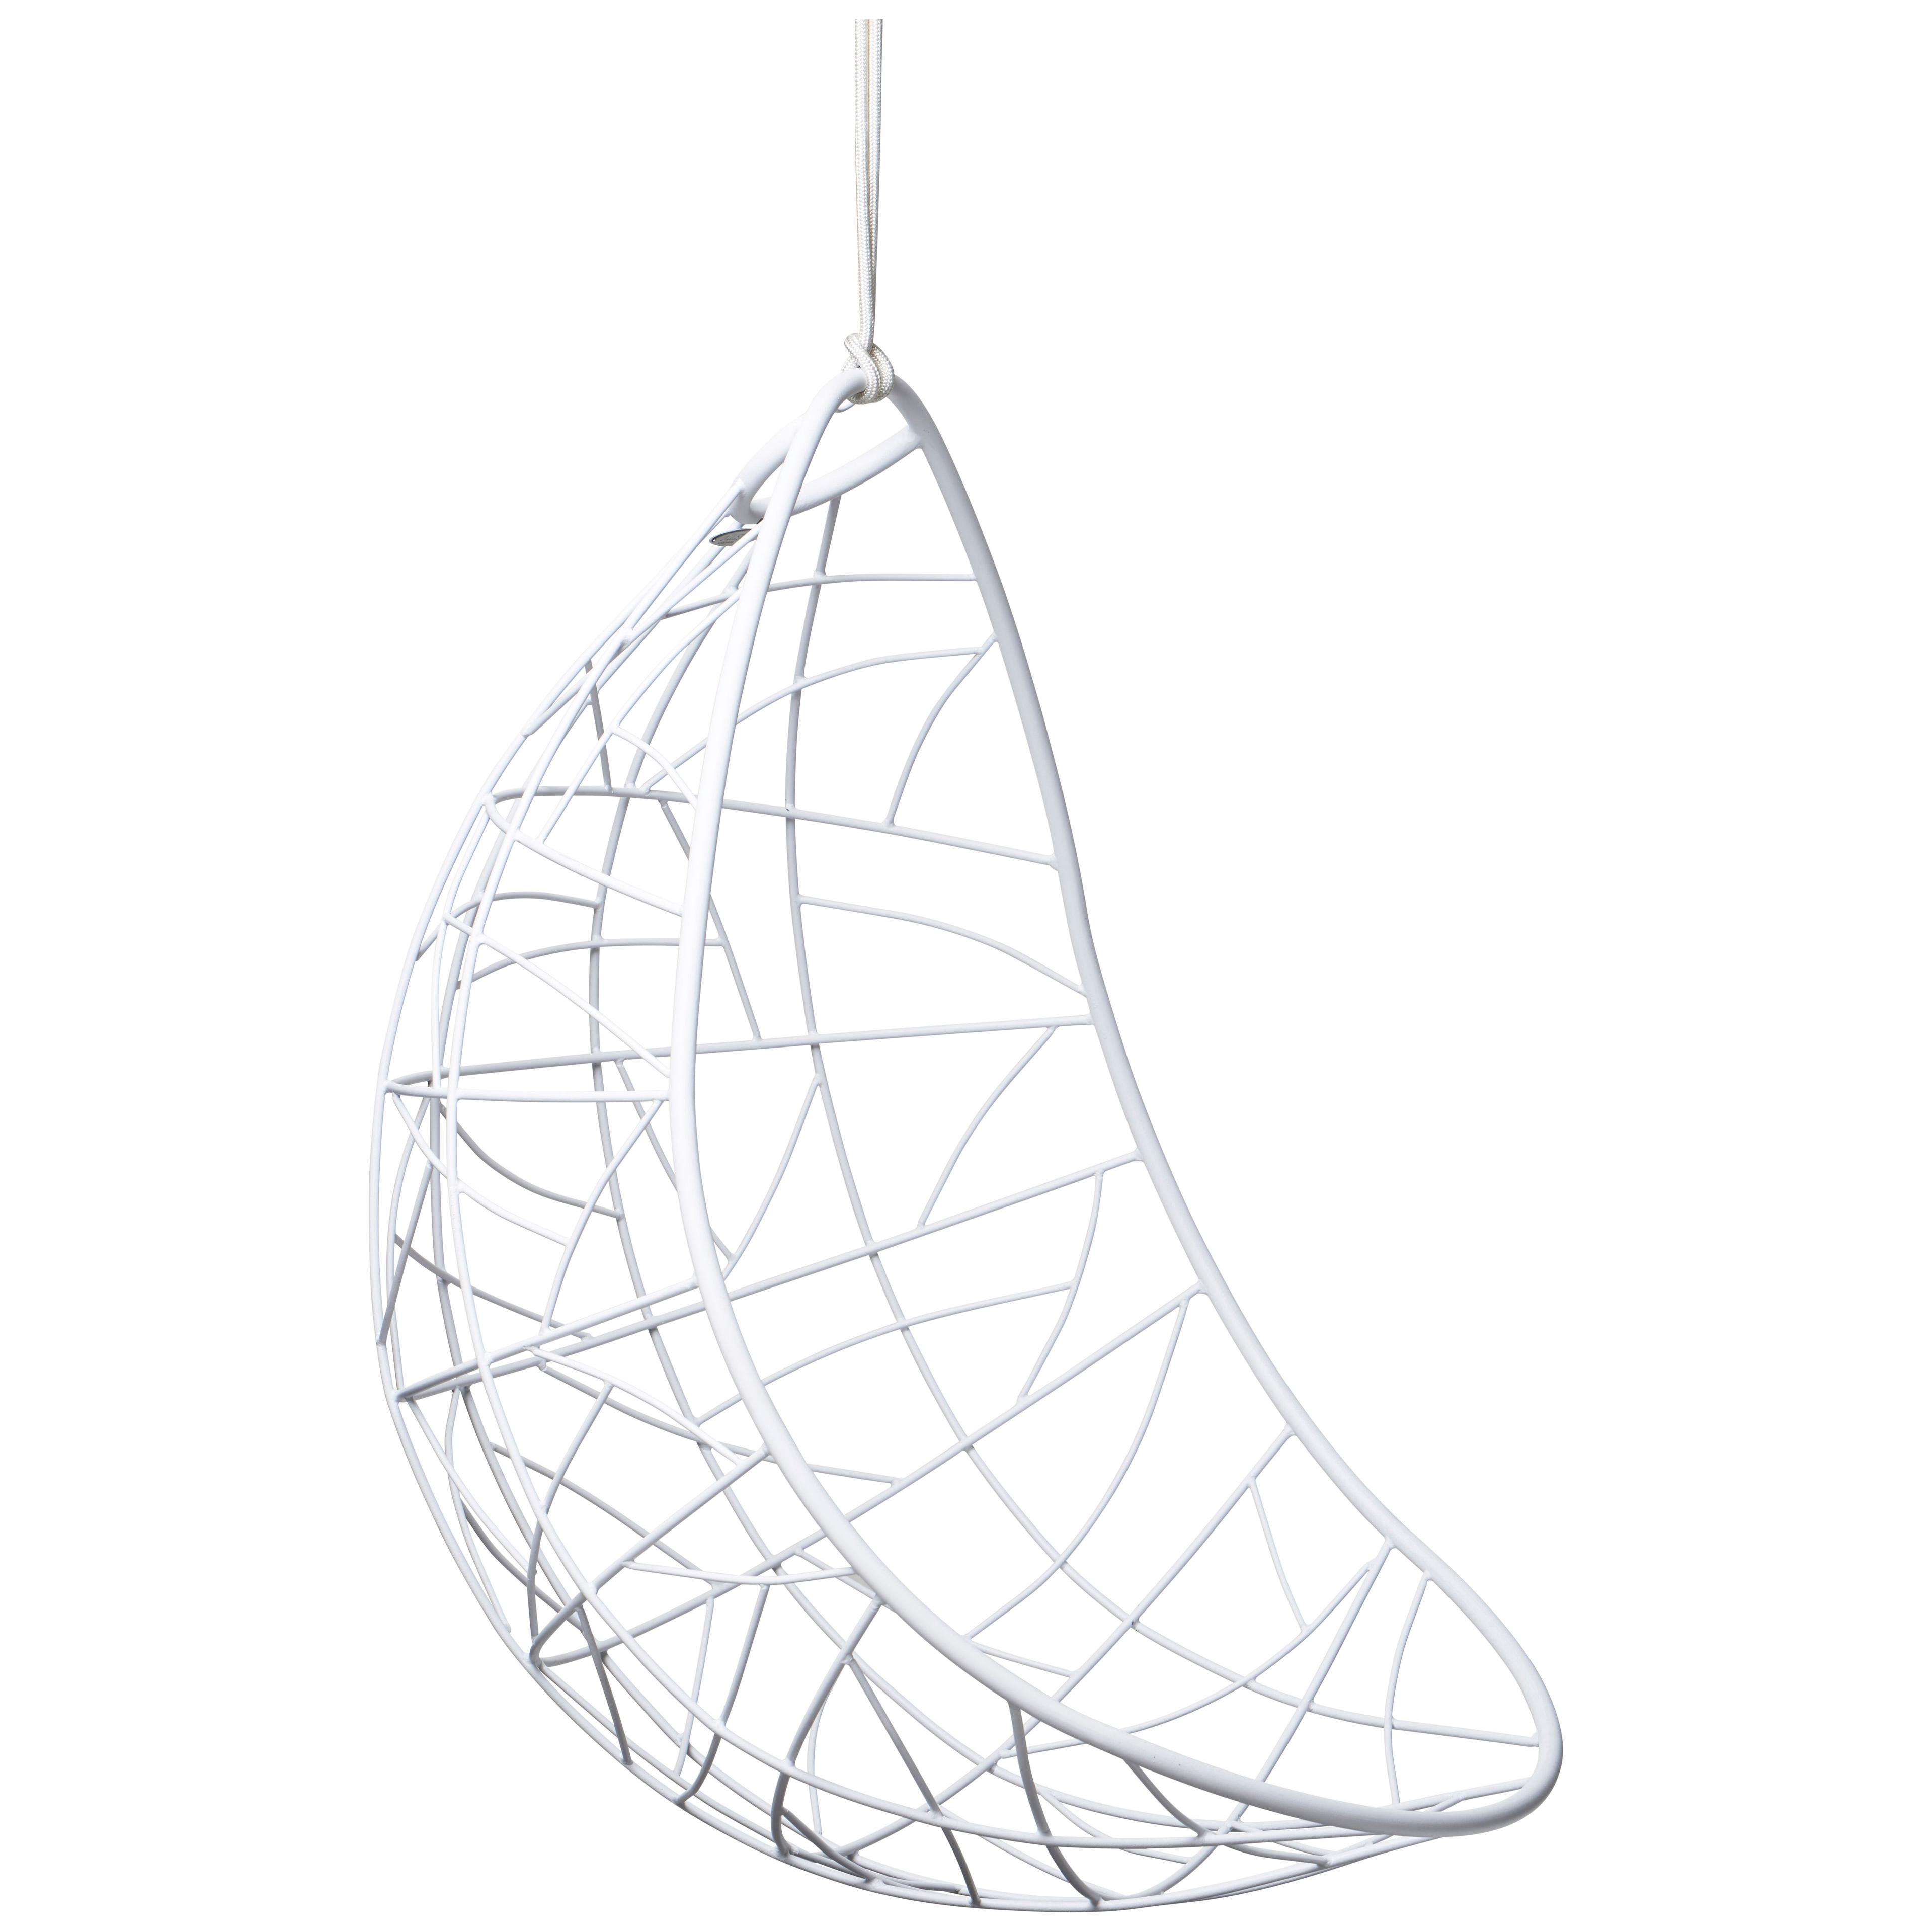 'Nest Egg - Twig' Hanging Swing Chair in White by Studio Stirling